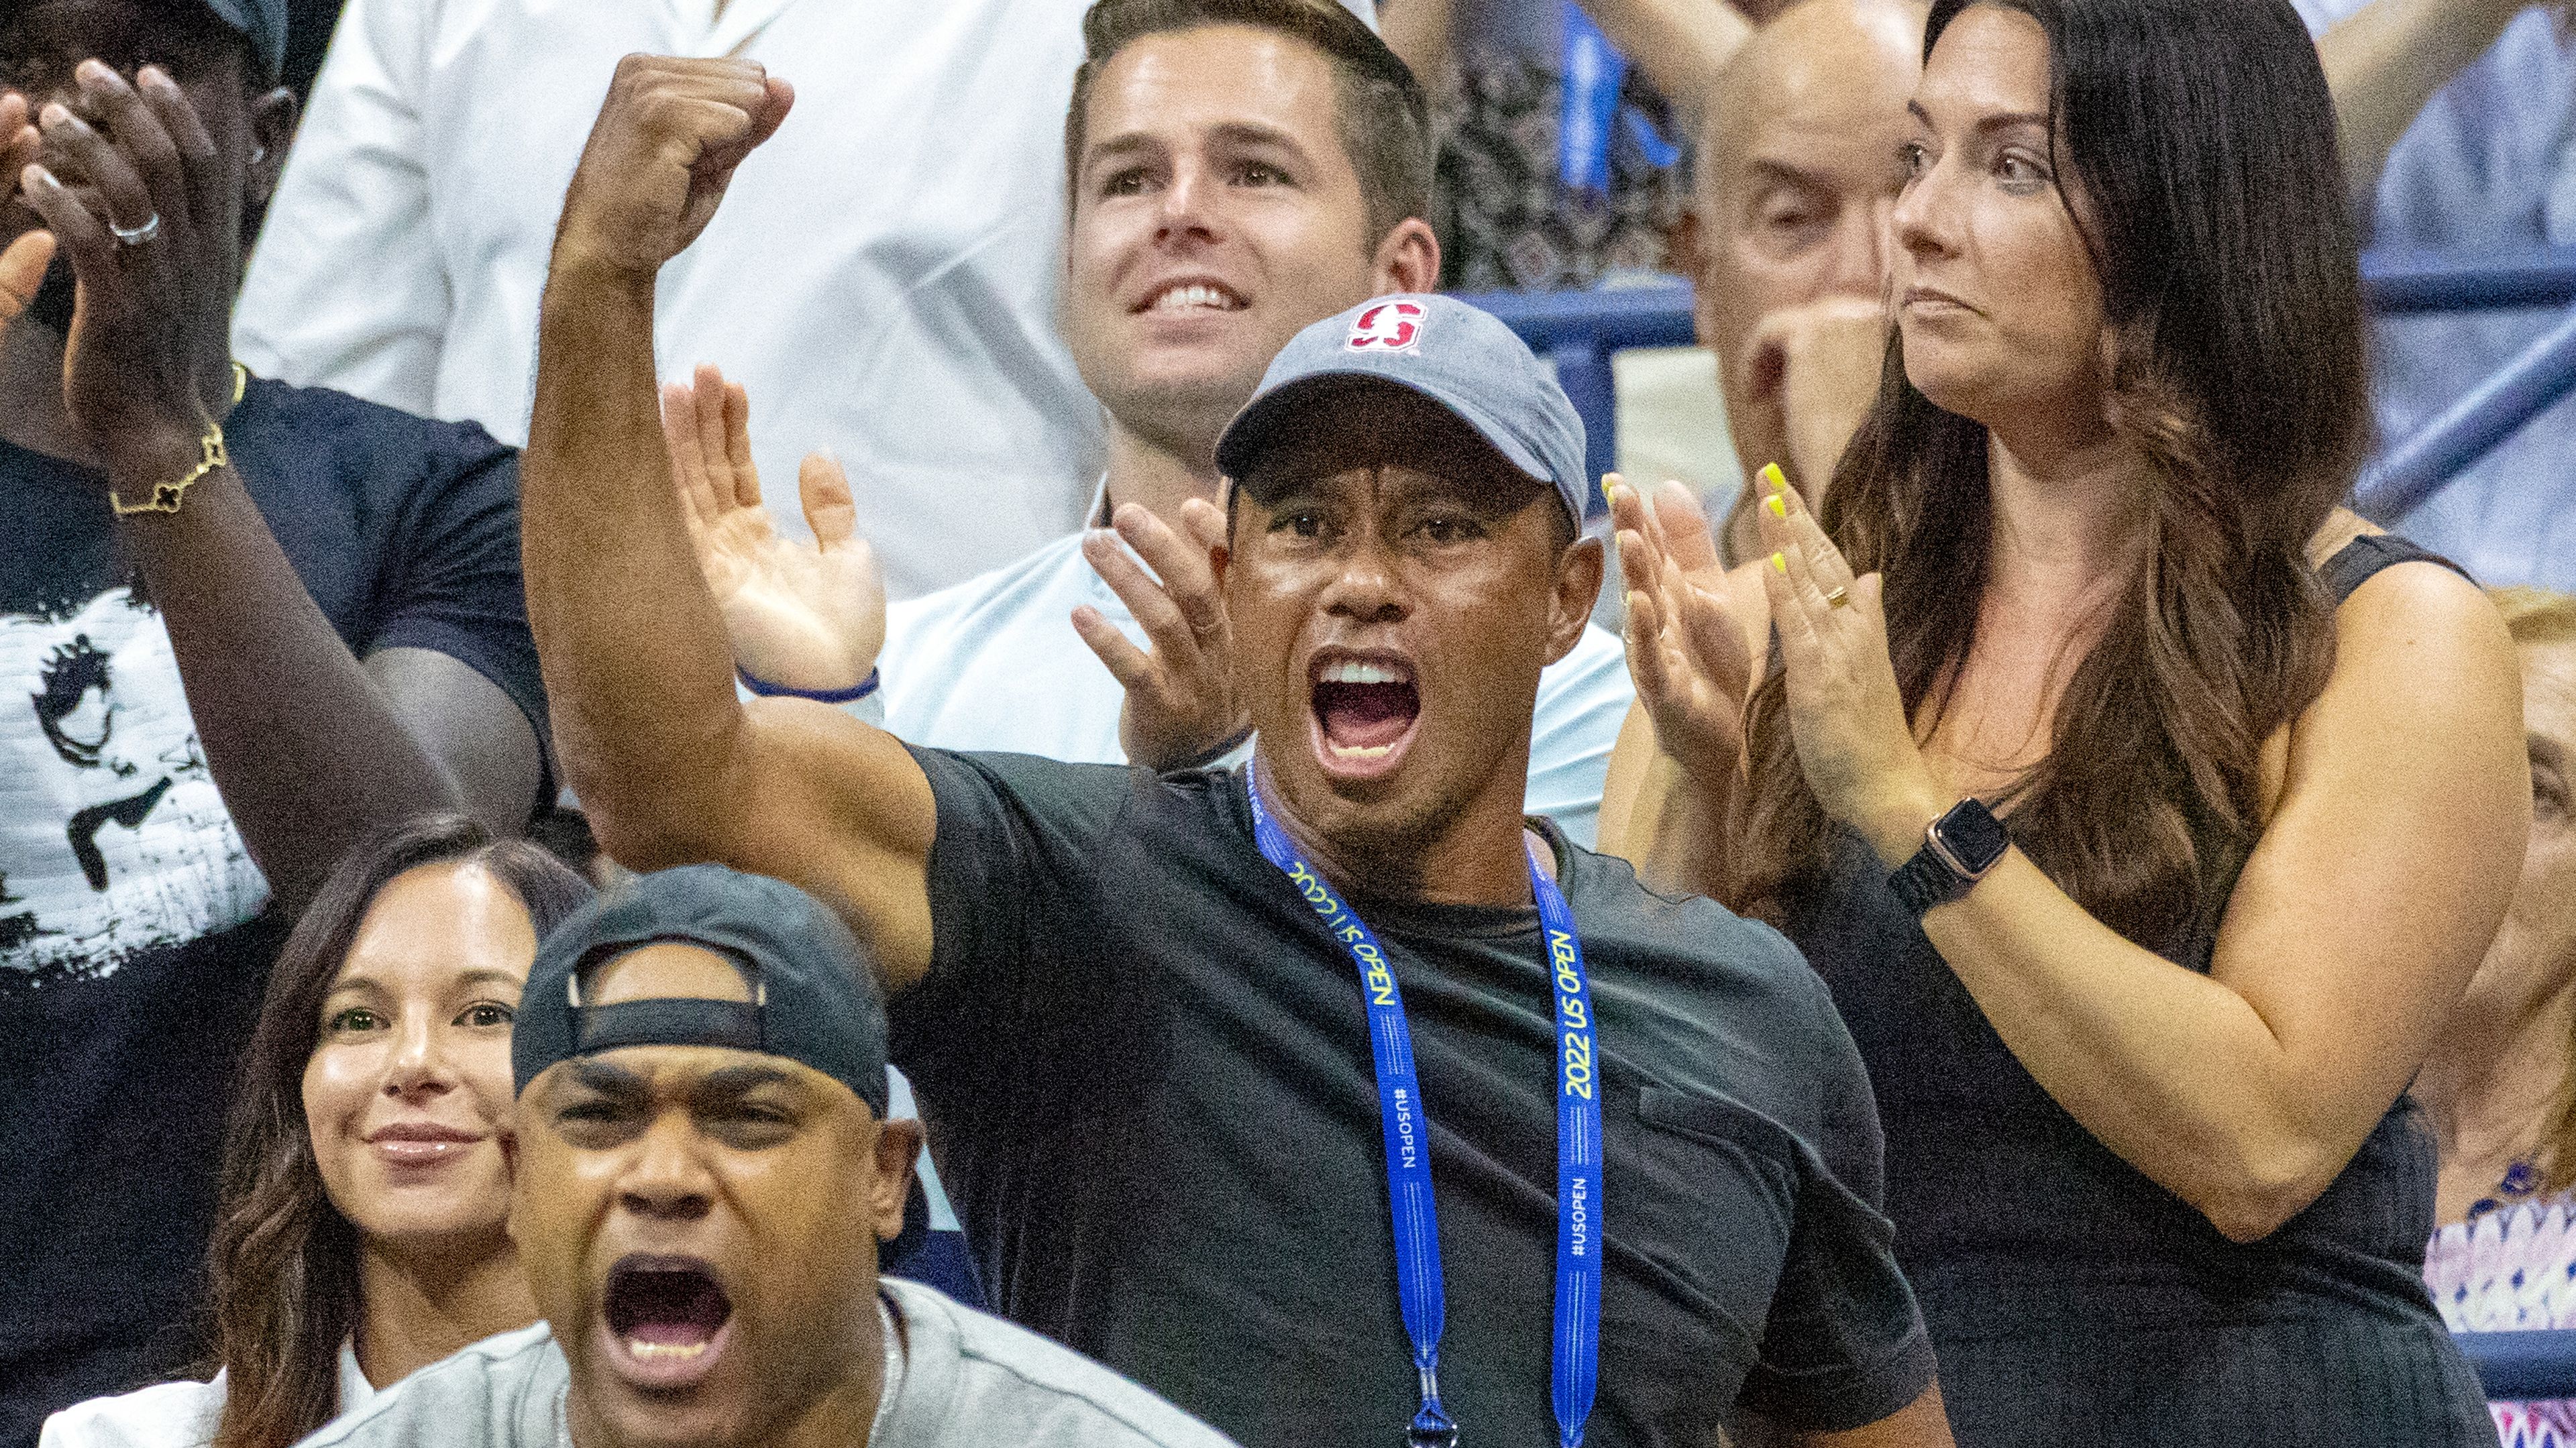 Tiger Woods reacts as Serena Williams wins the first set against Anett Kontaveit in the US Open second round. Photo: Tim Clayton